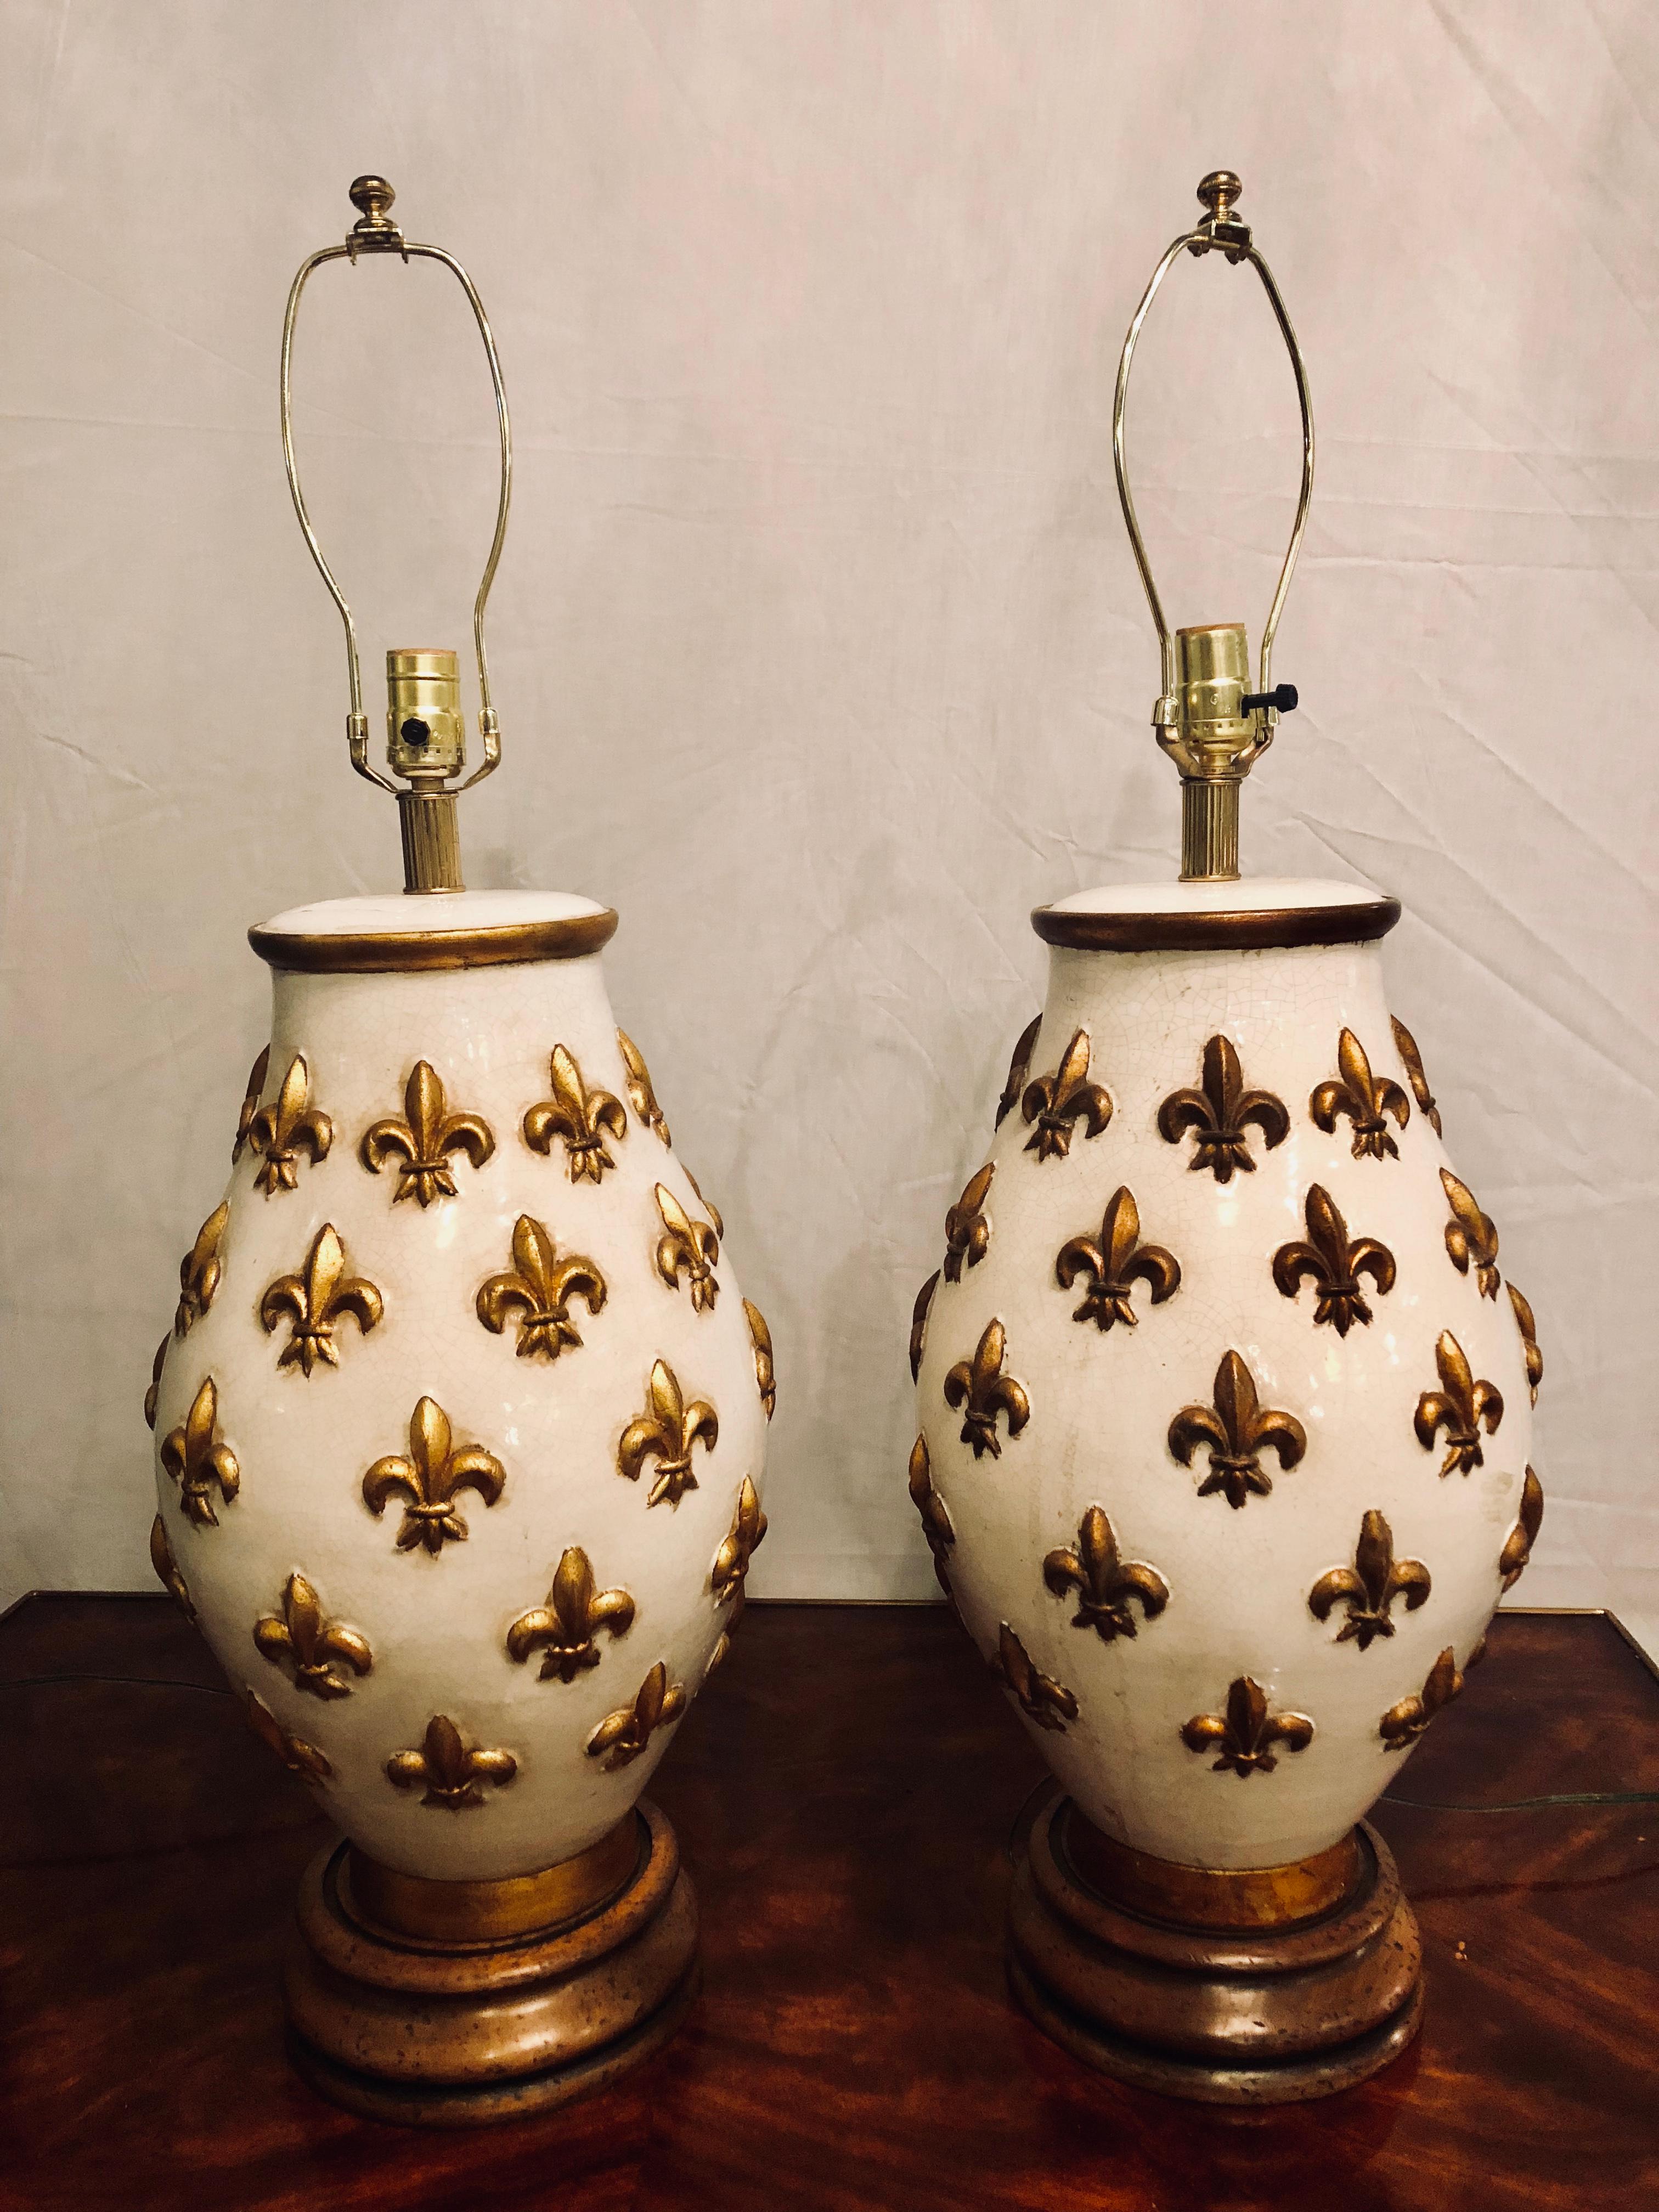 A pair of white and gilt porcelain bulbous shaped table lamps on wooden bases.